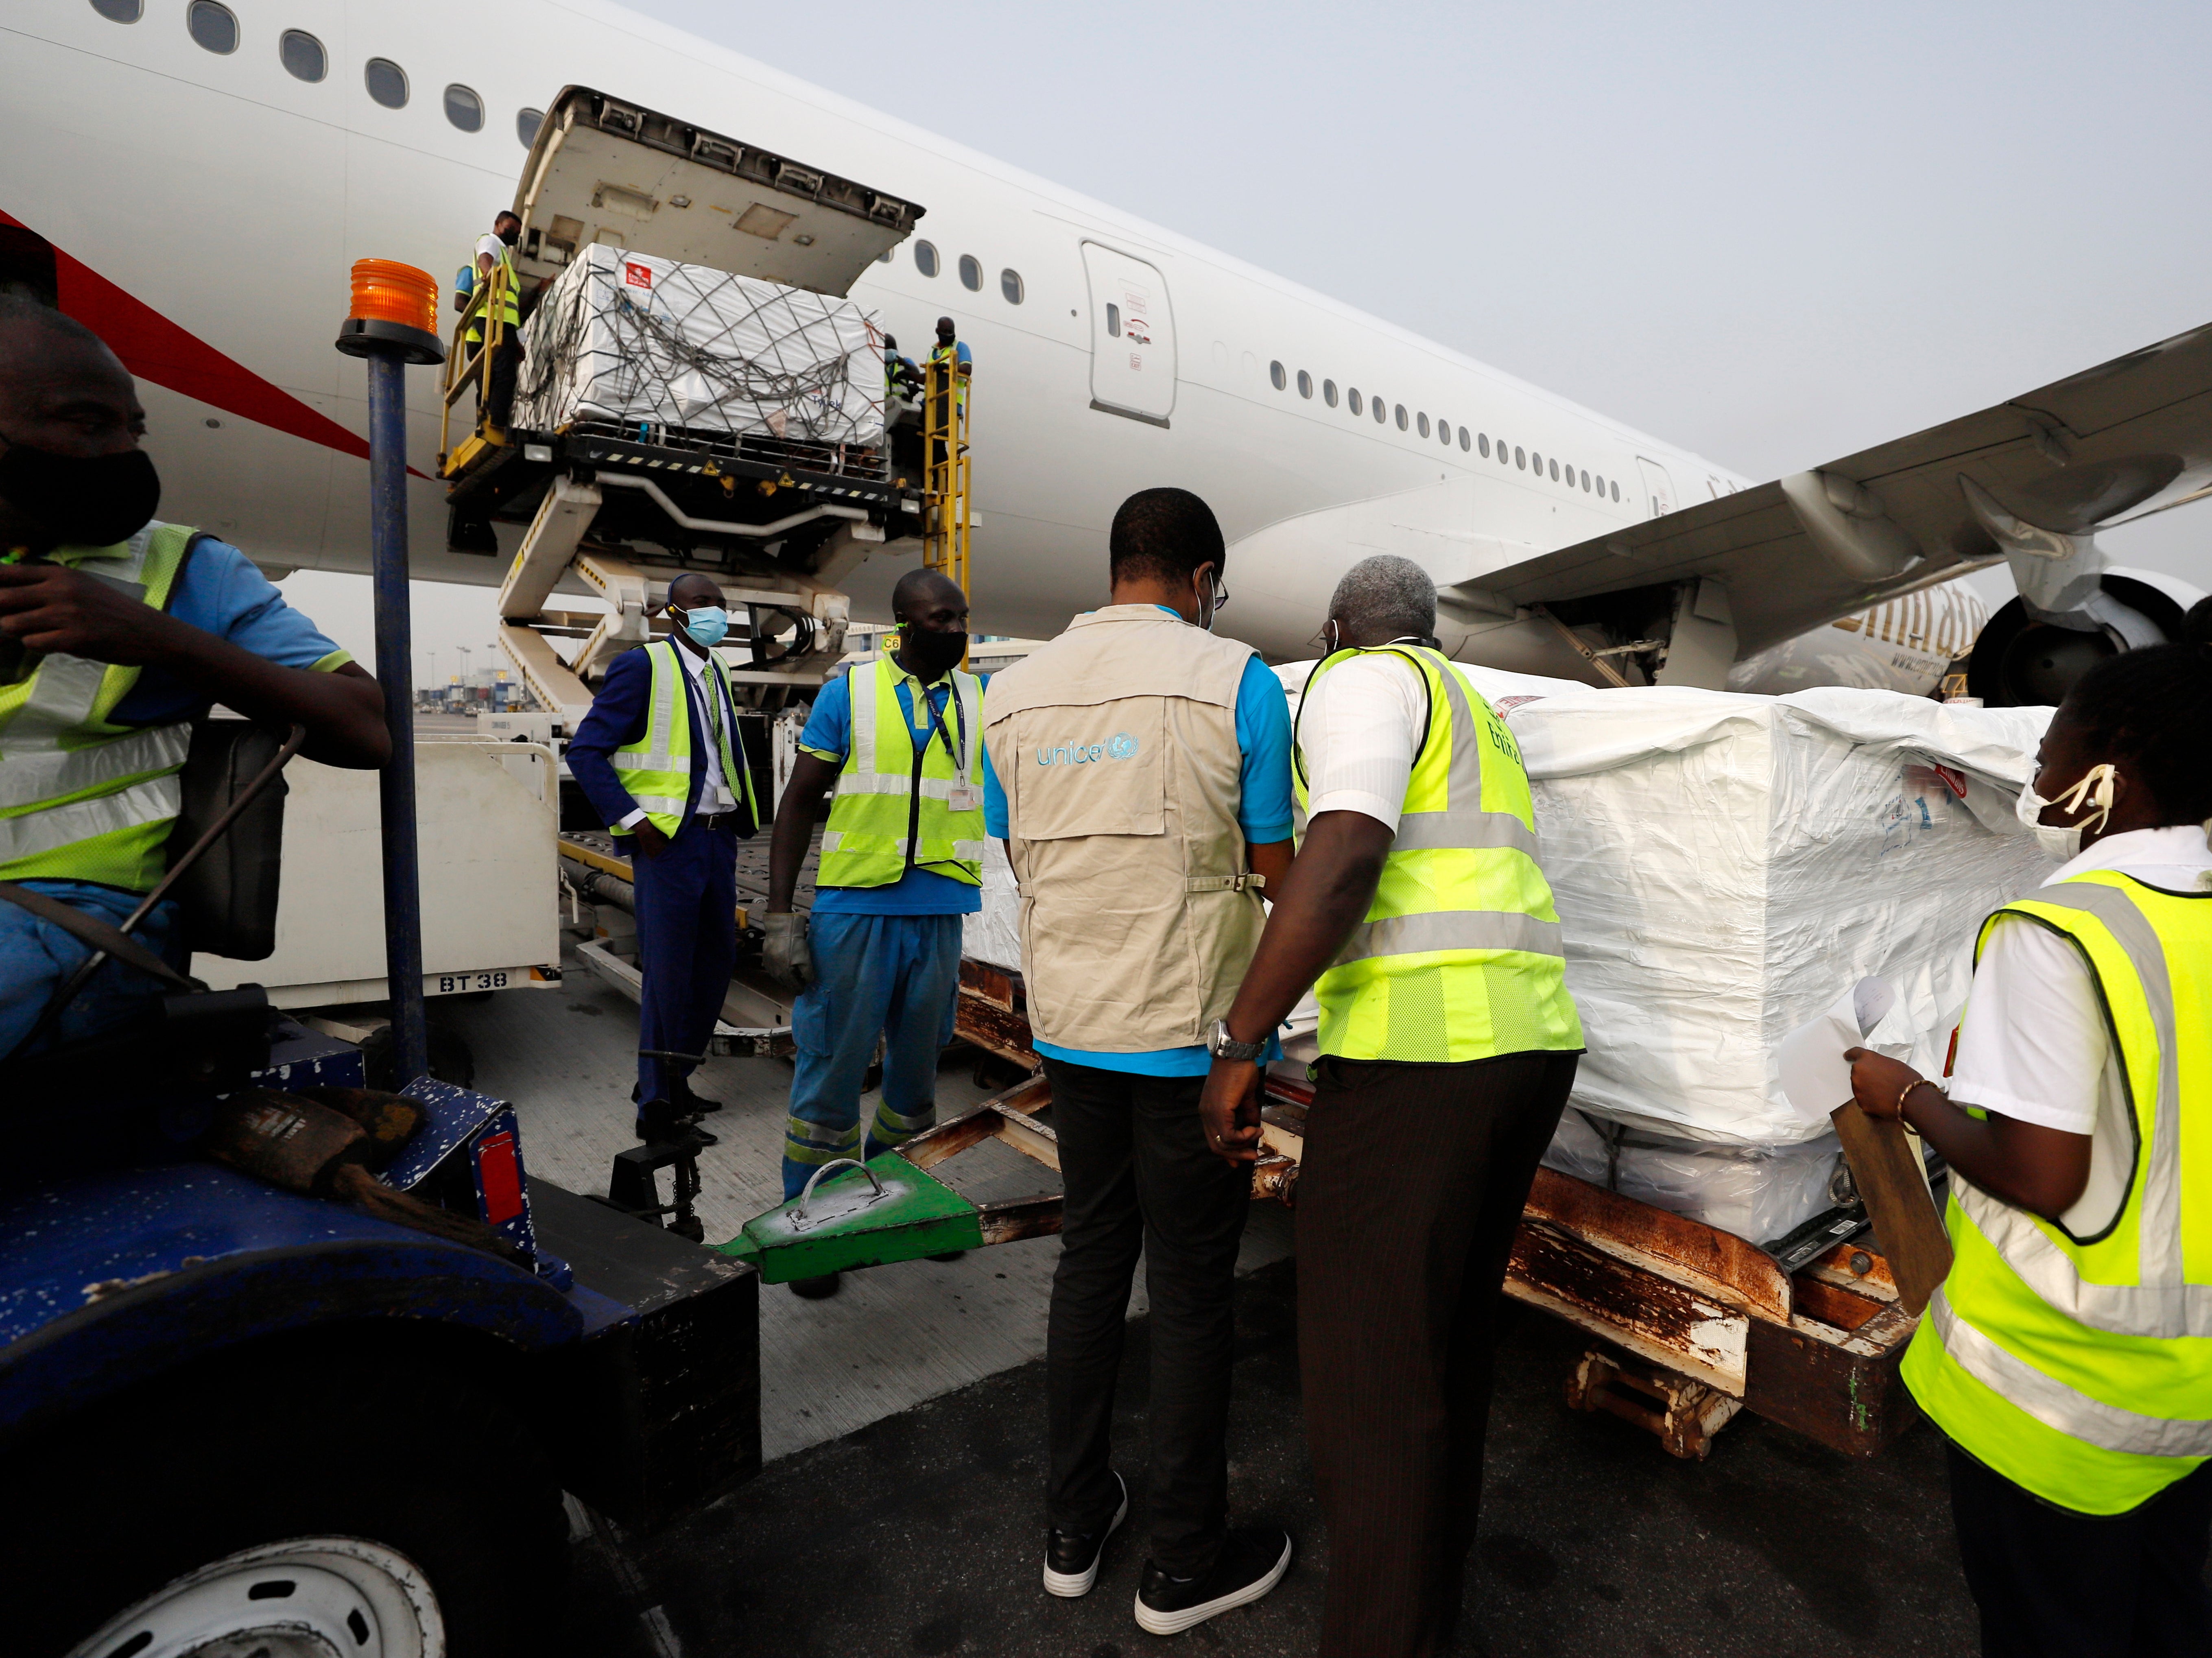 Covid vaccines distributed by Covax arrive at Kotoka International Airport, Accra